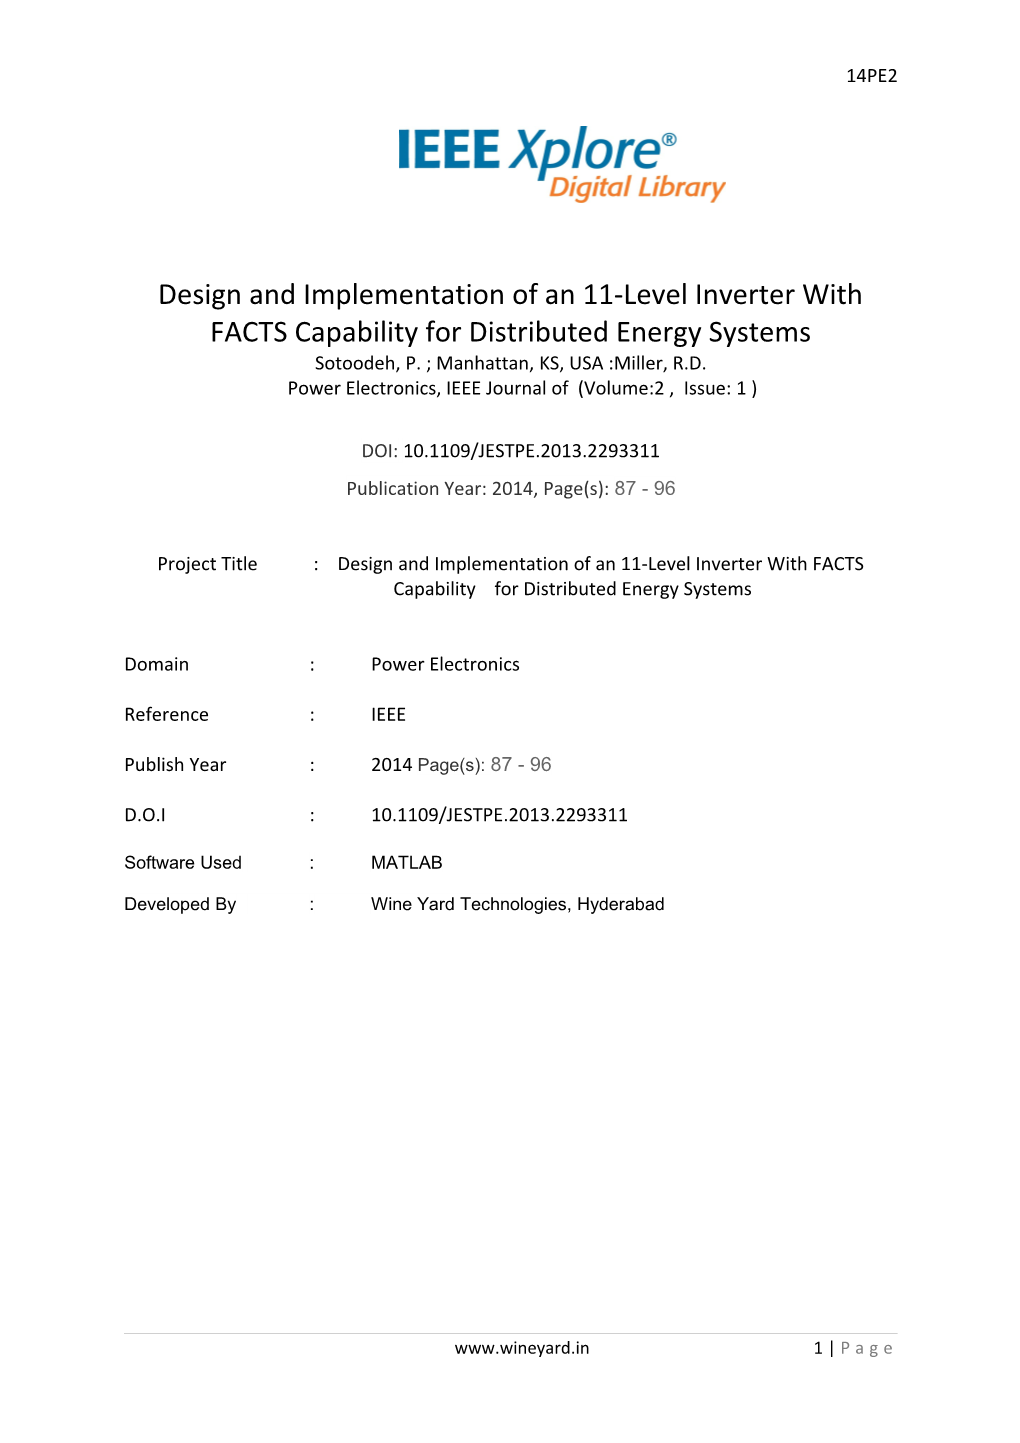 Design and Implementation of an 11-Level Inverter with FACTS Capability for Distributed